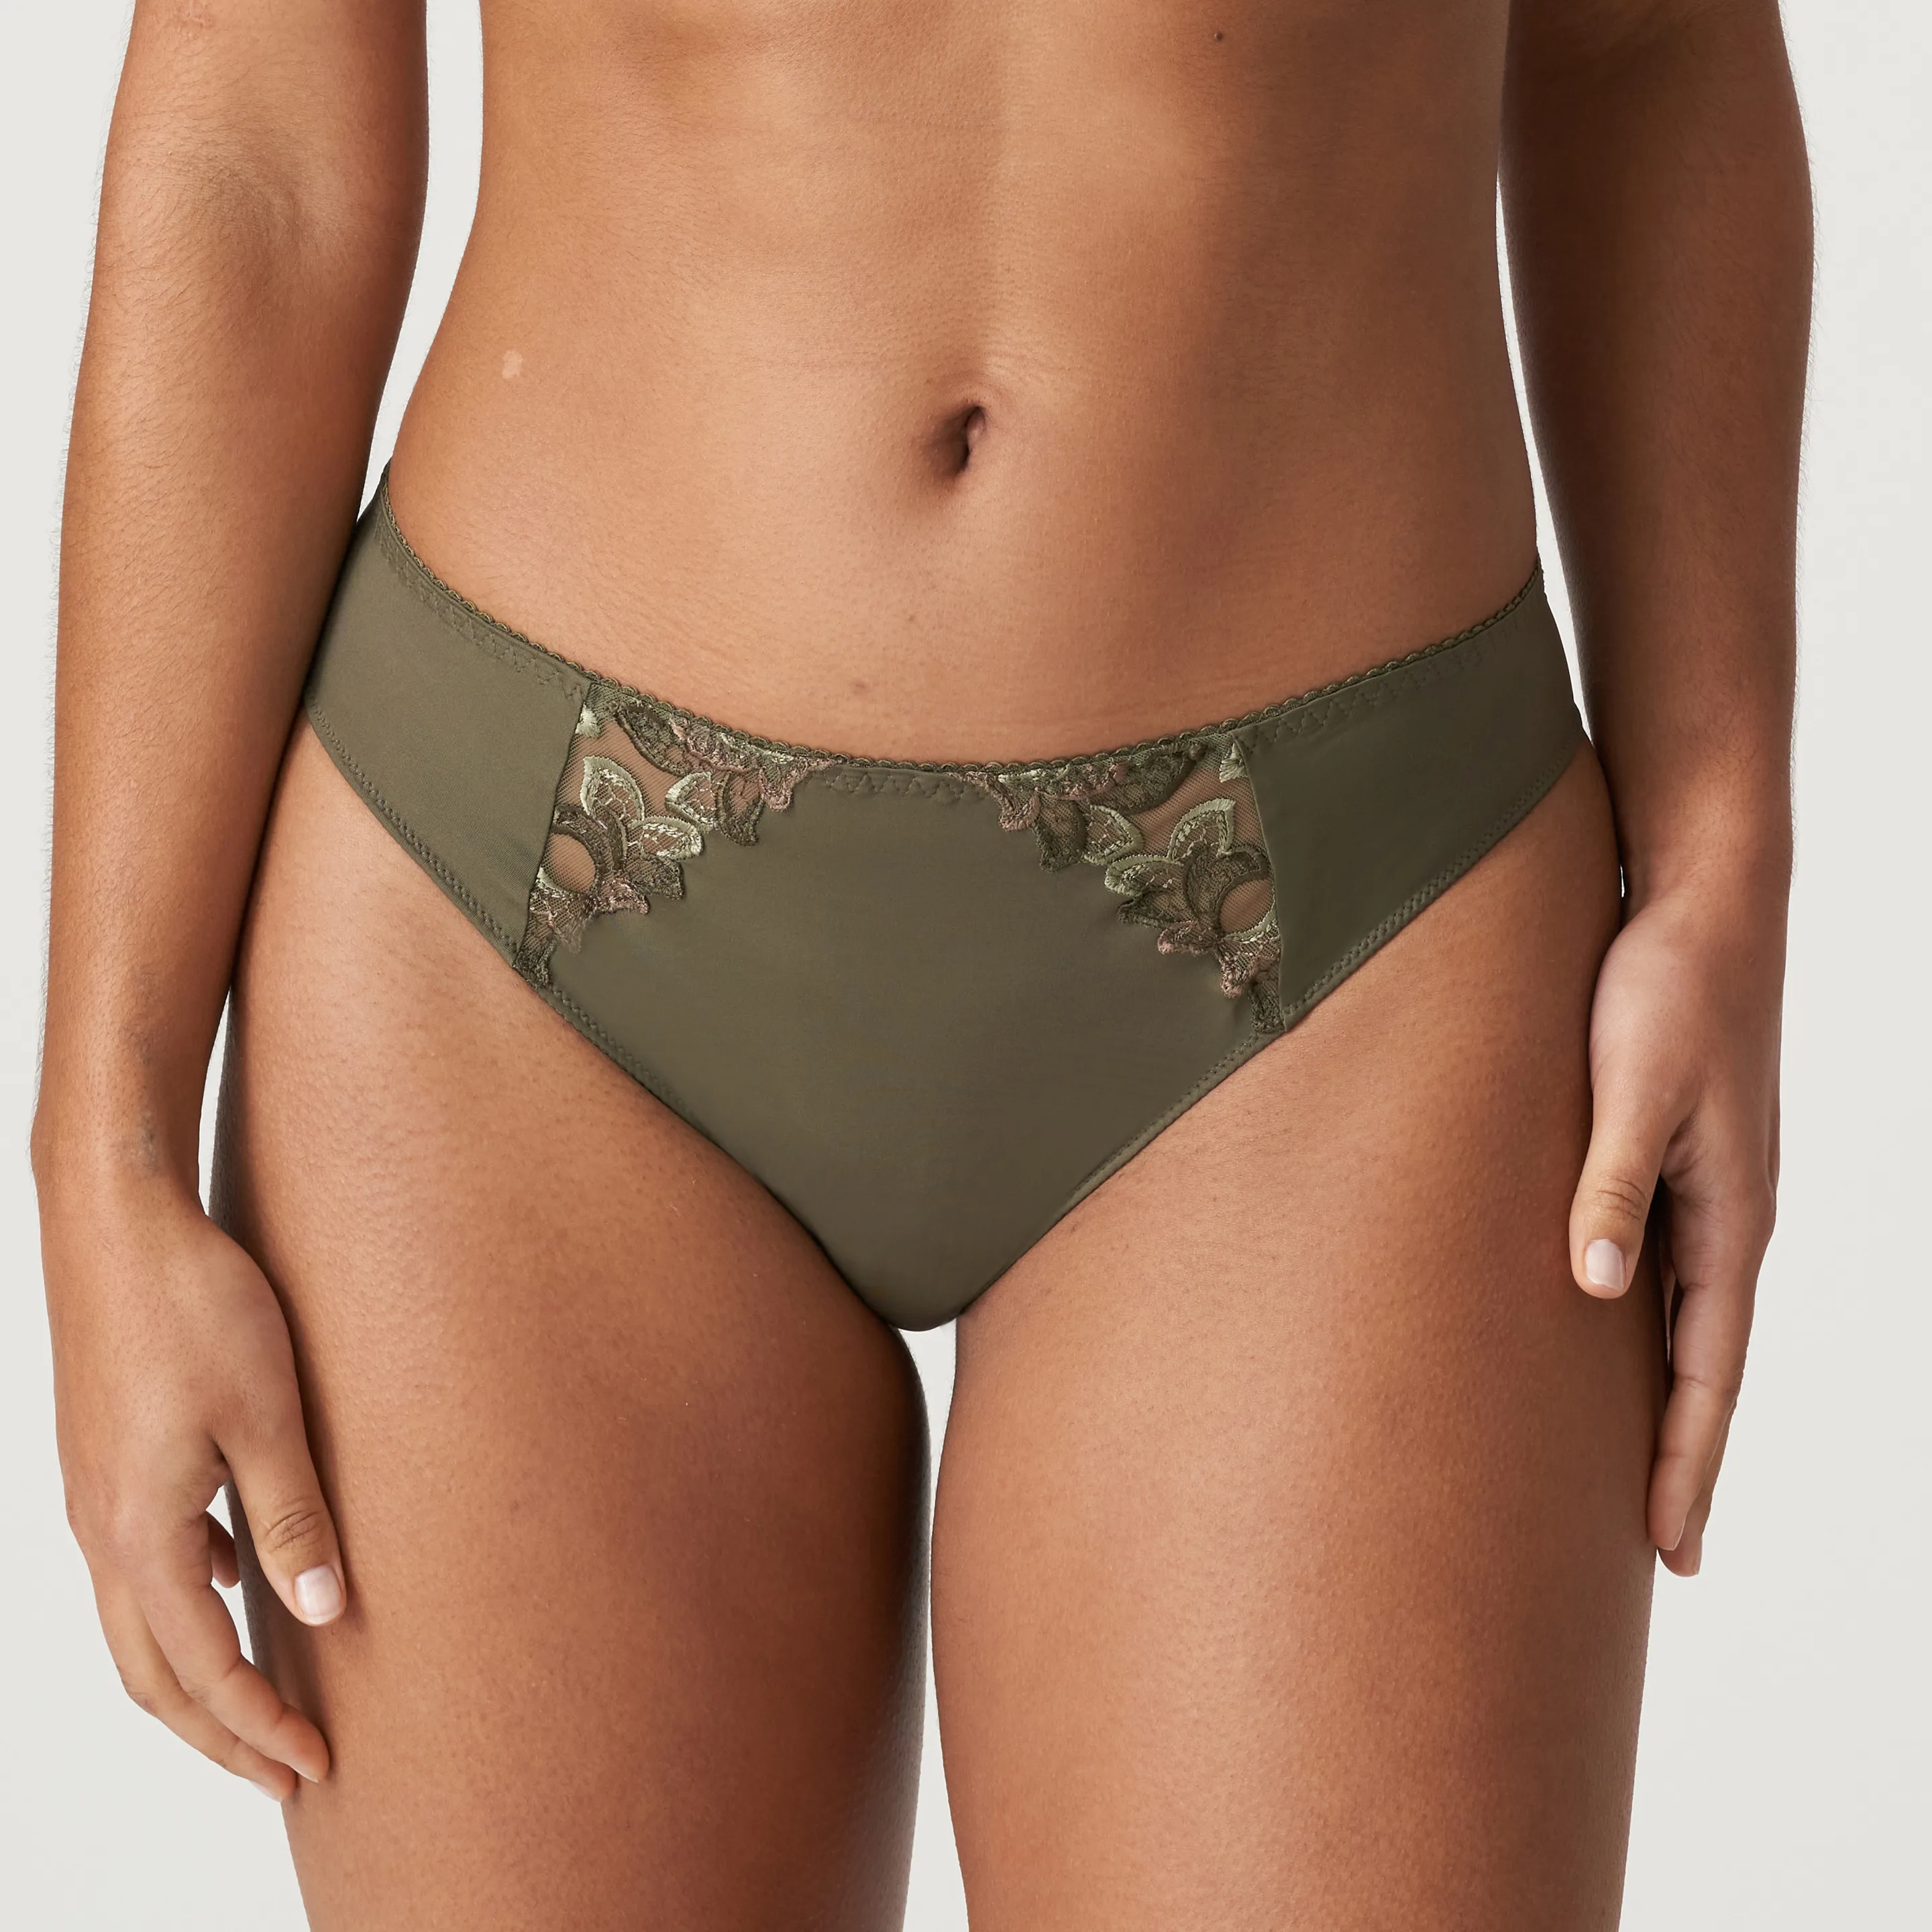 PrimaDonna Deauville Full Cup Bra in Paradise Green I To K Cup